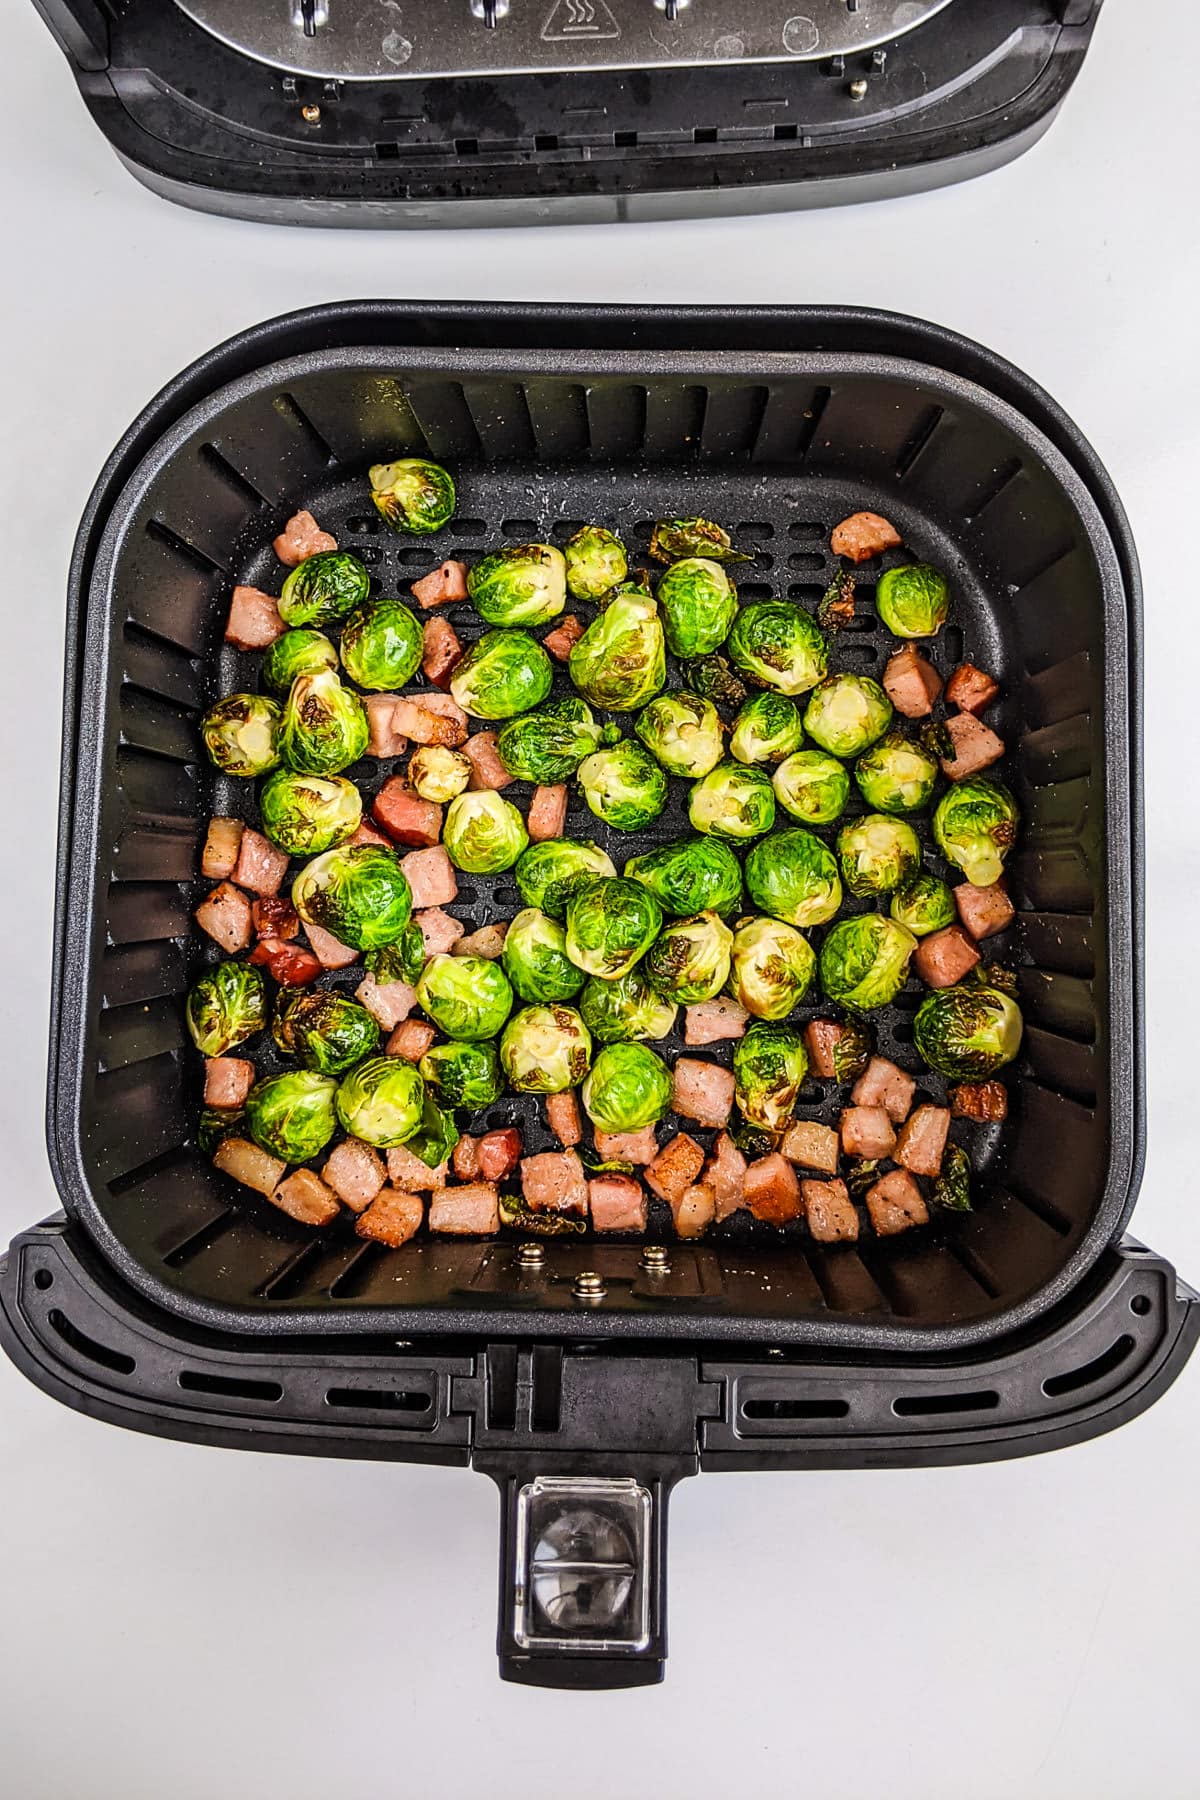 Top view of air fryer basket with brussels sprouts with bacon.